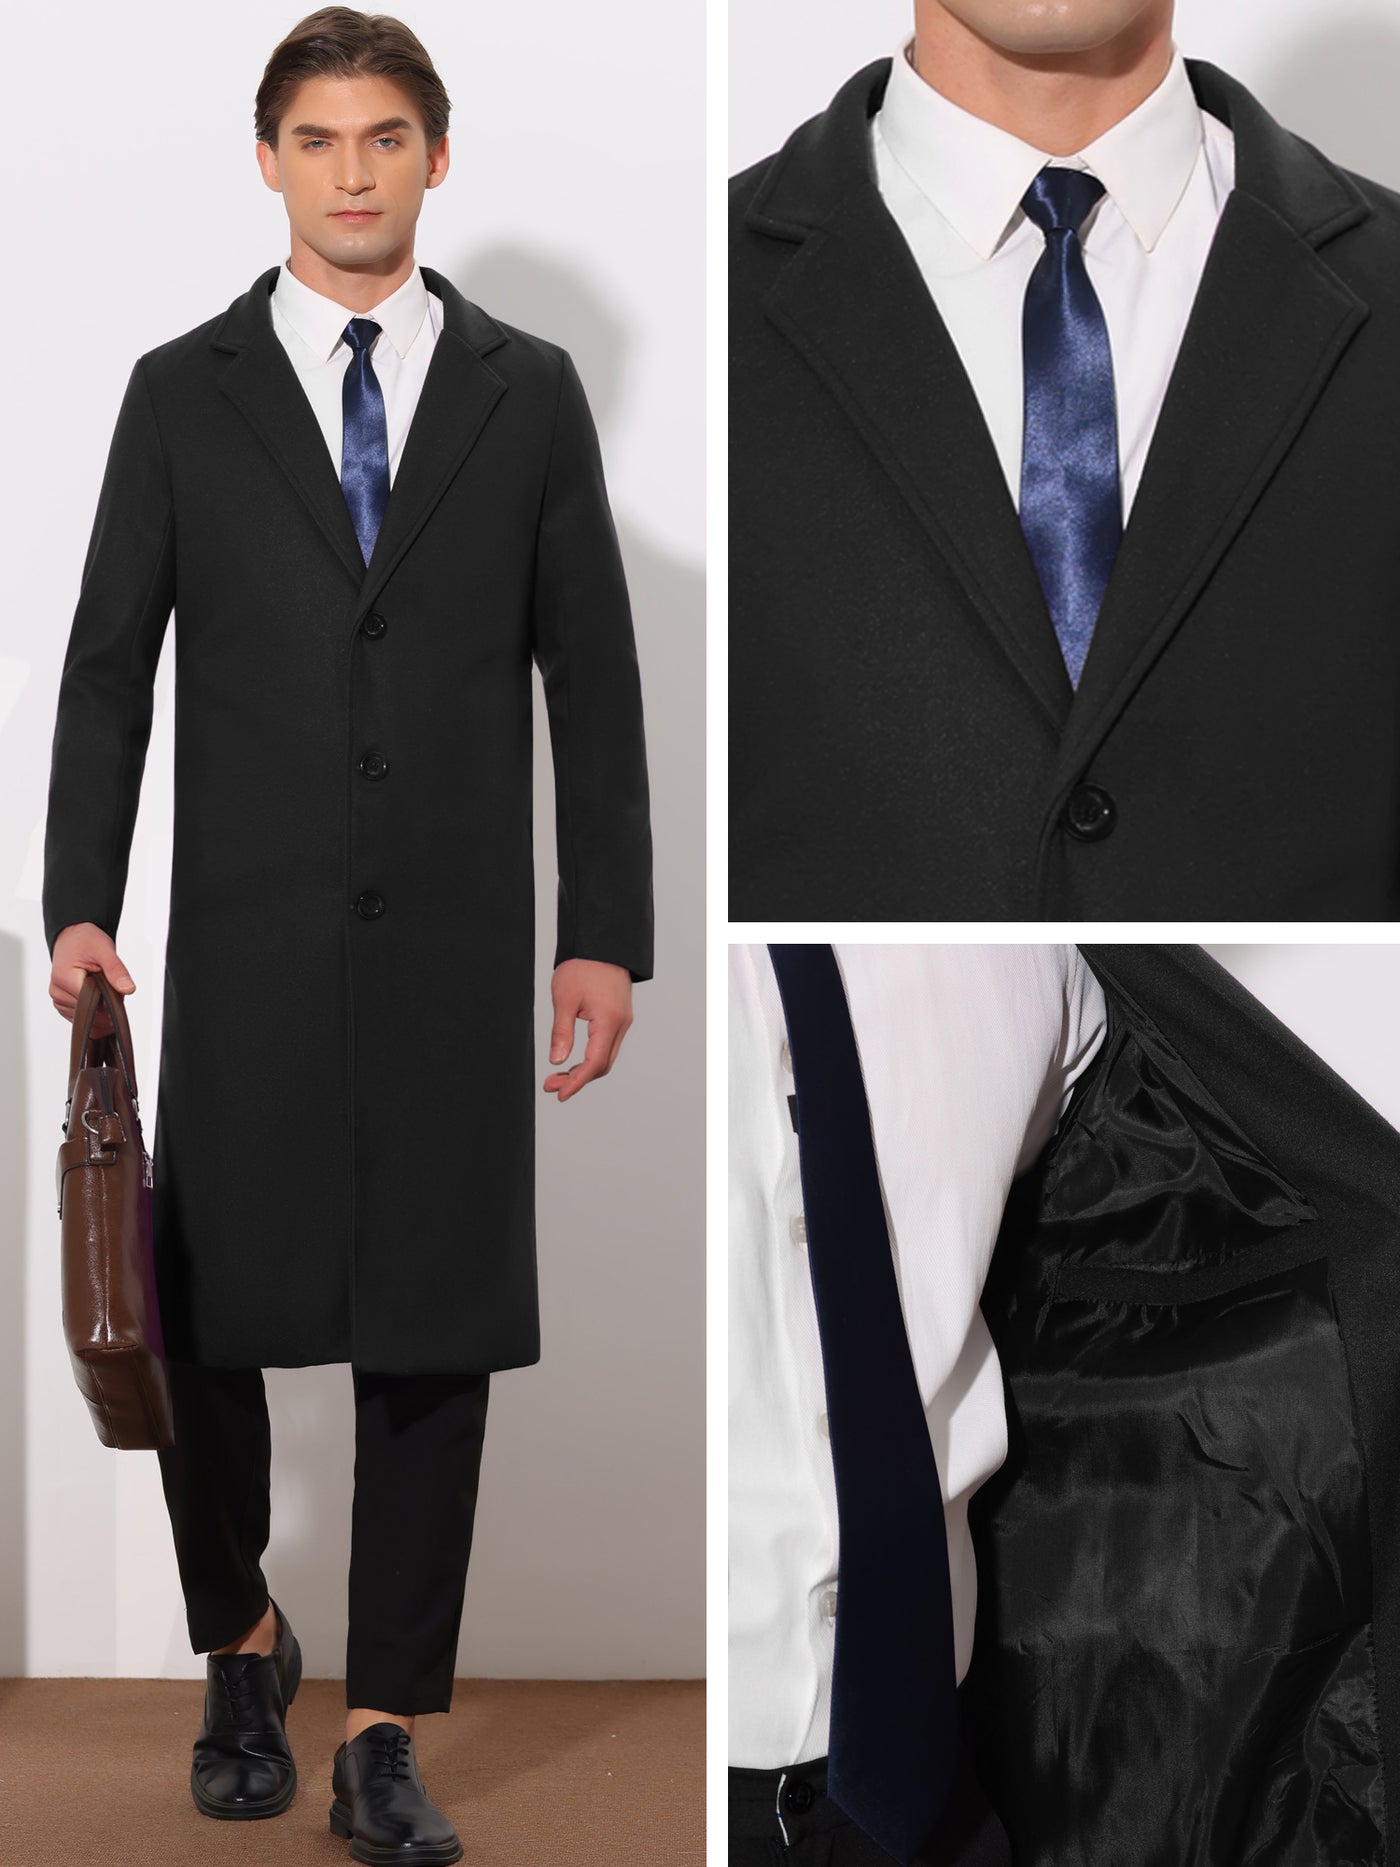 Bublédon Winter Overcoat for Men's Single Breasted Notch Lapel Formal Trench Coats